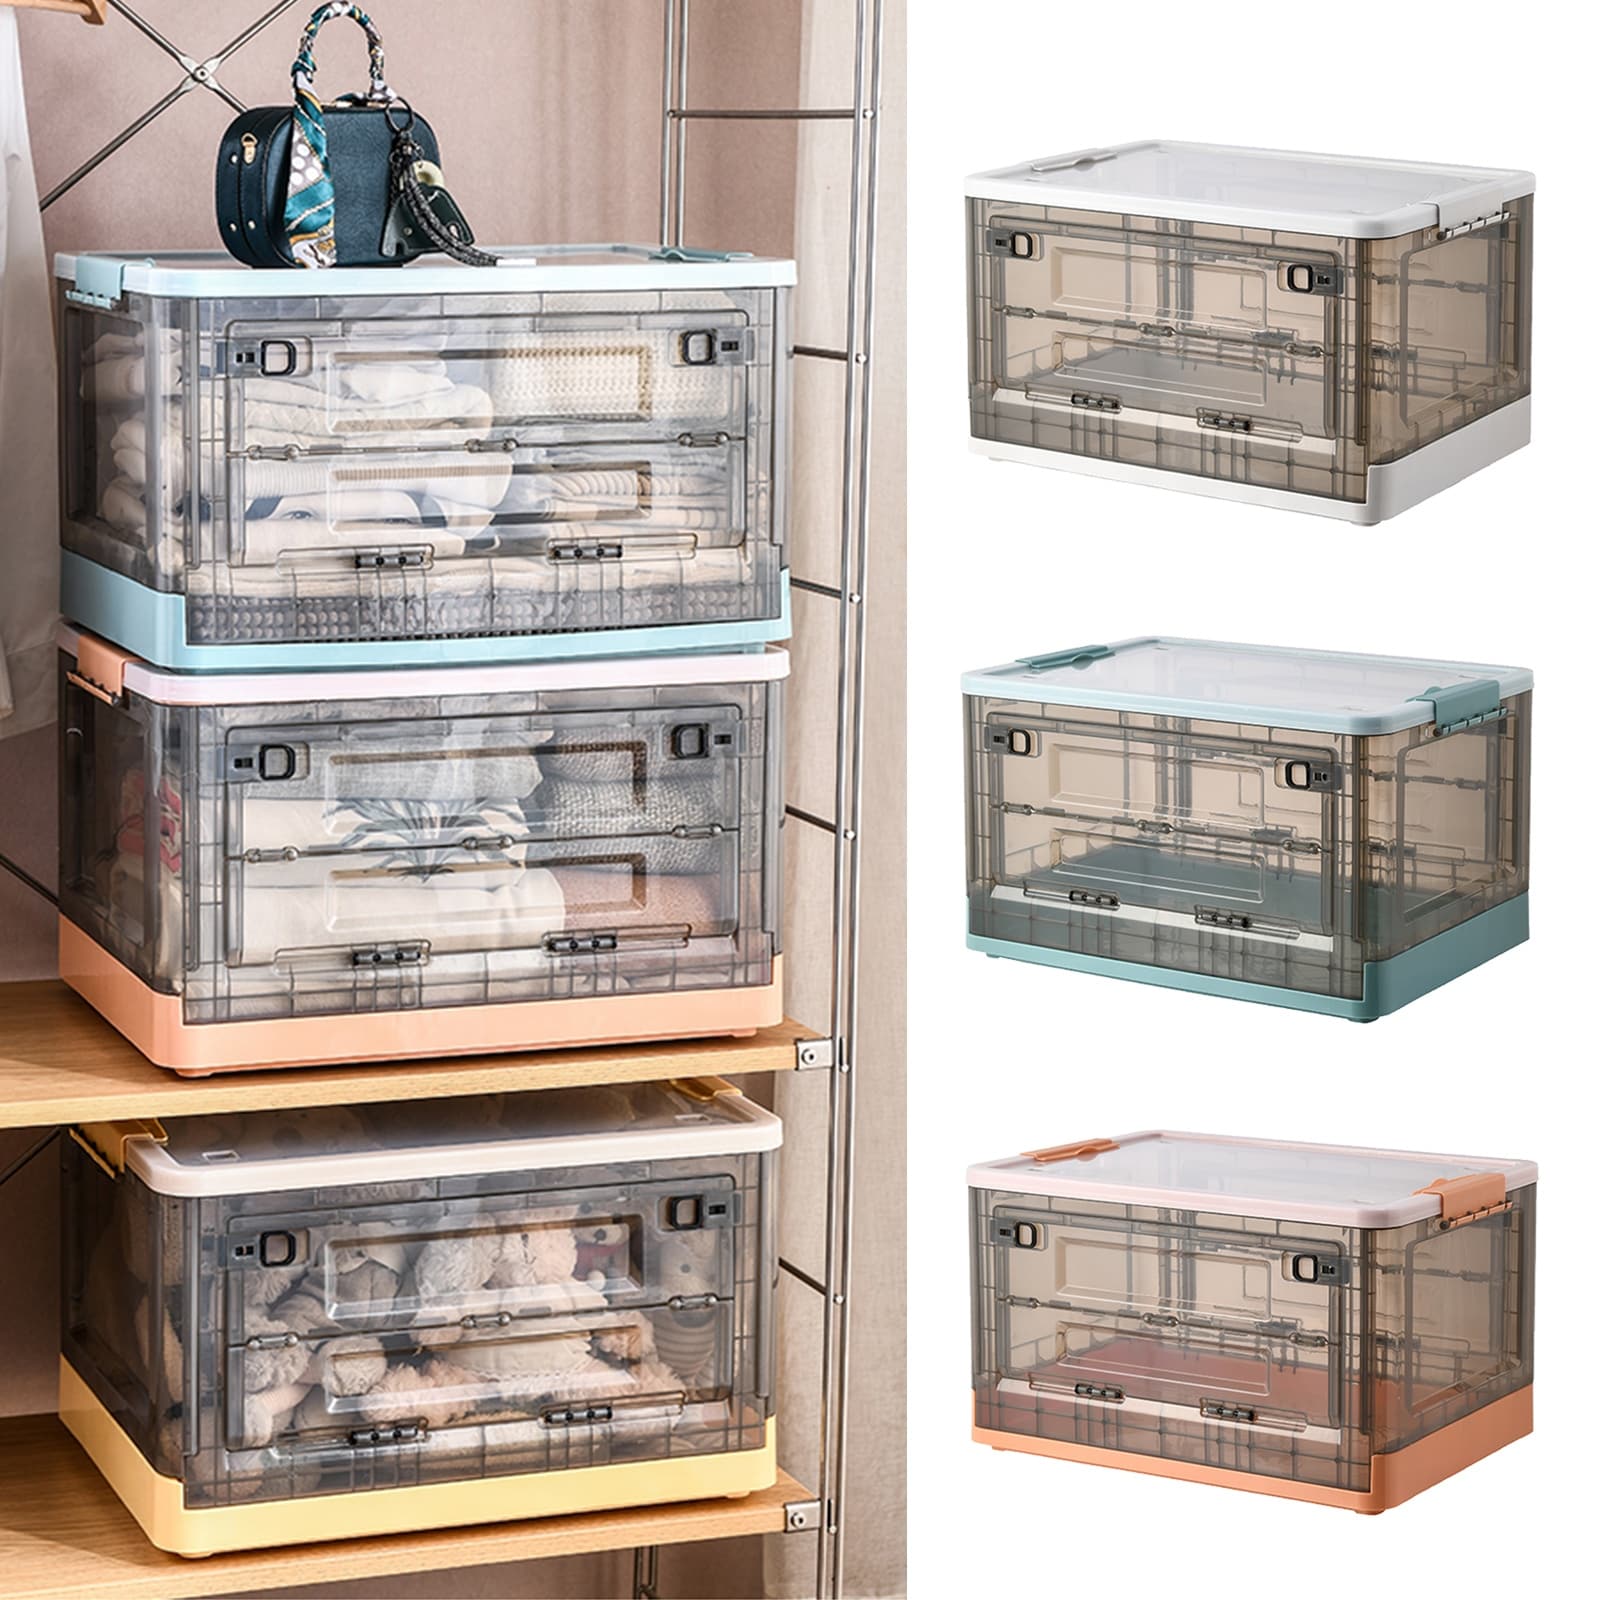 Stackable Plastic Storage Bins with Wheels ，4 Tier Folding Storage Box with  Safety Latch Doors ， Collapsible Storage Bins with Lids for Organizing